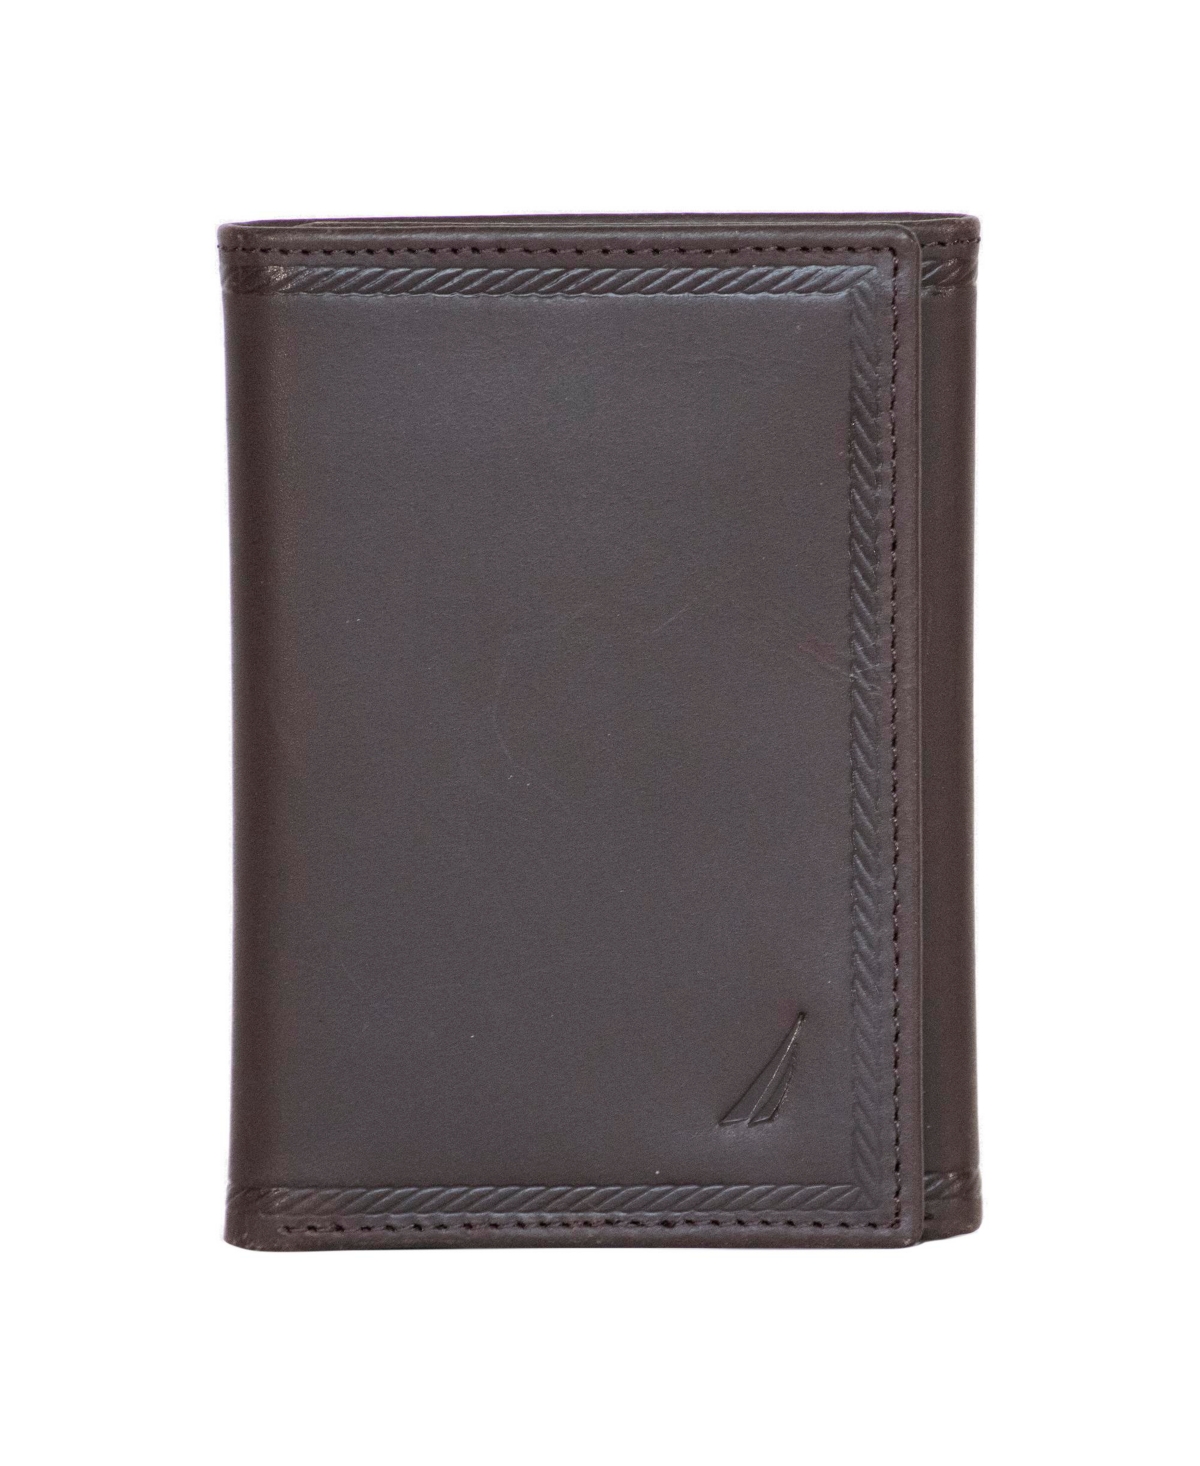 Men's Trifold Leather Wallet - Brown